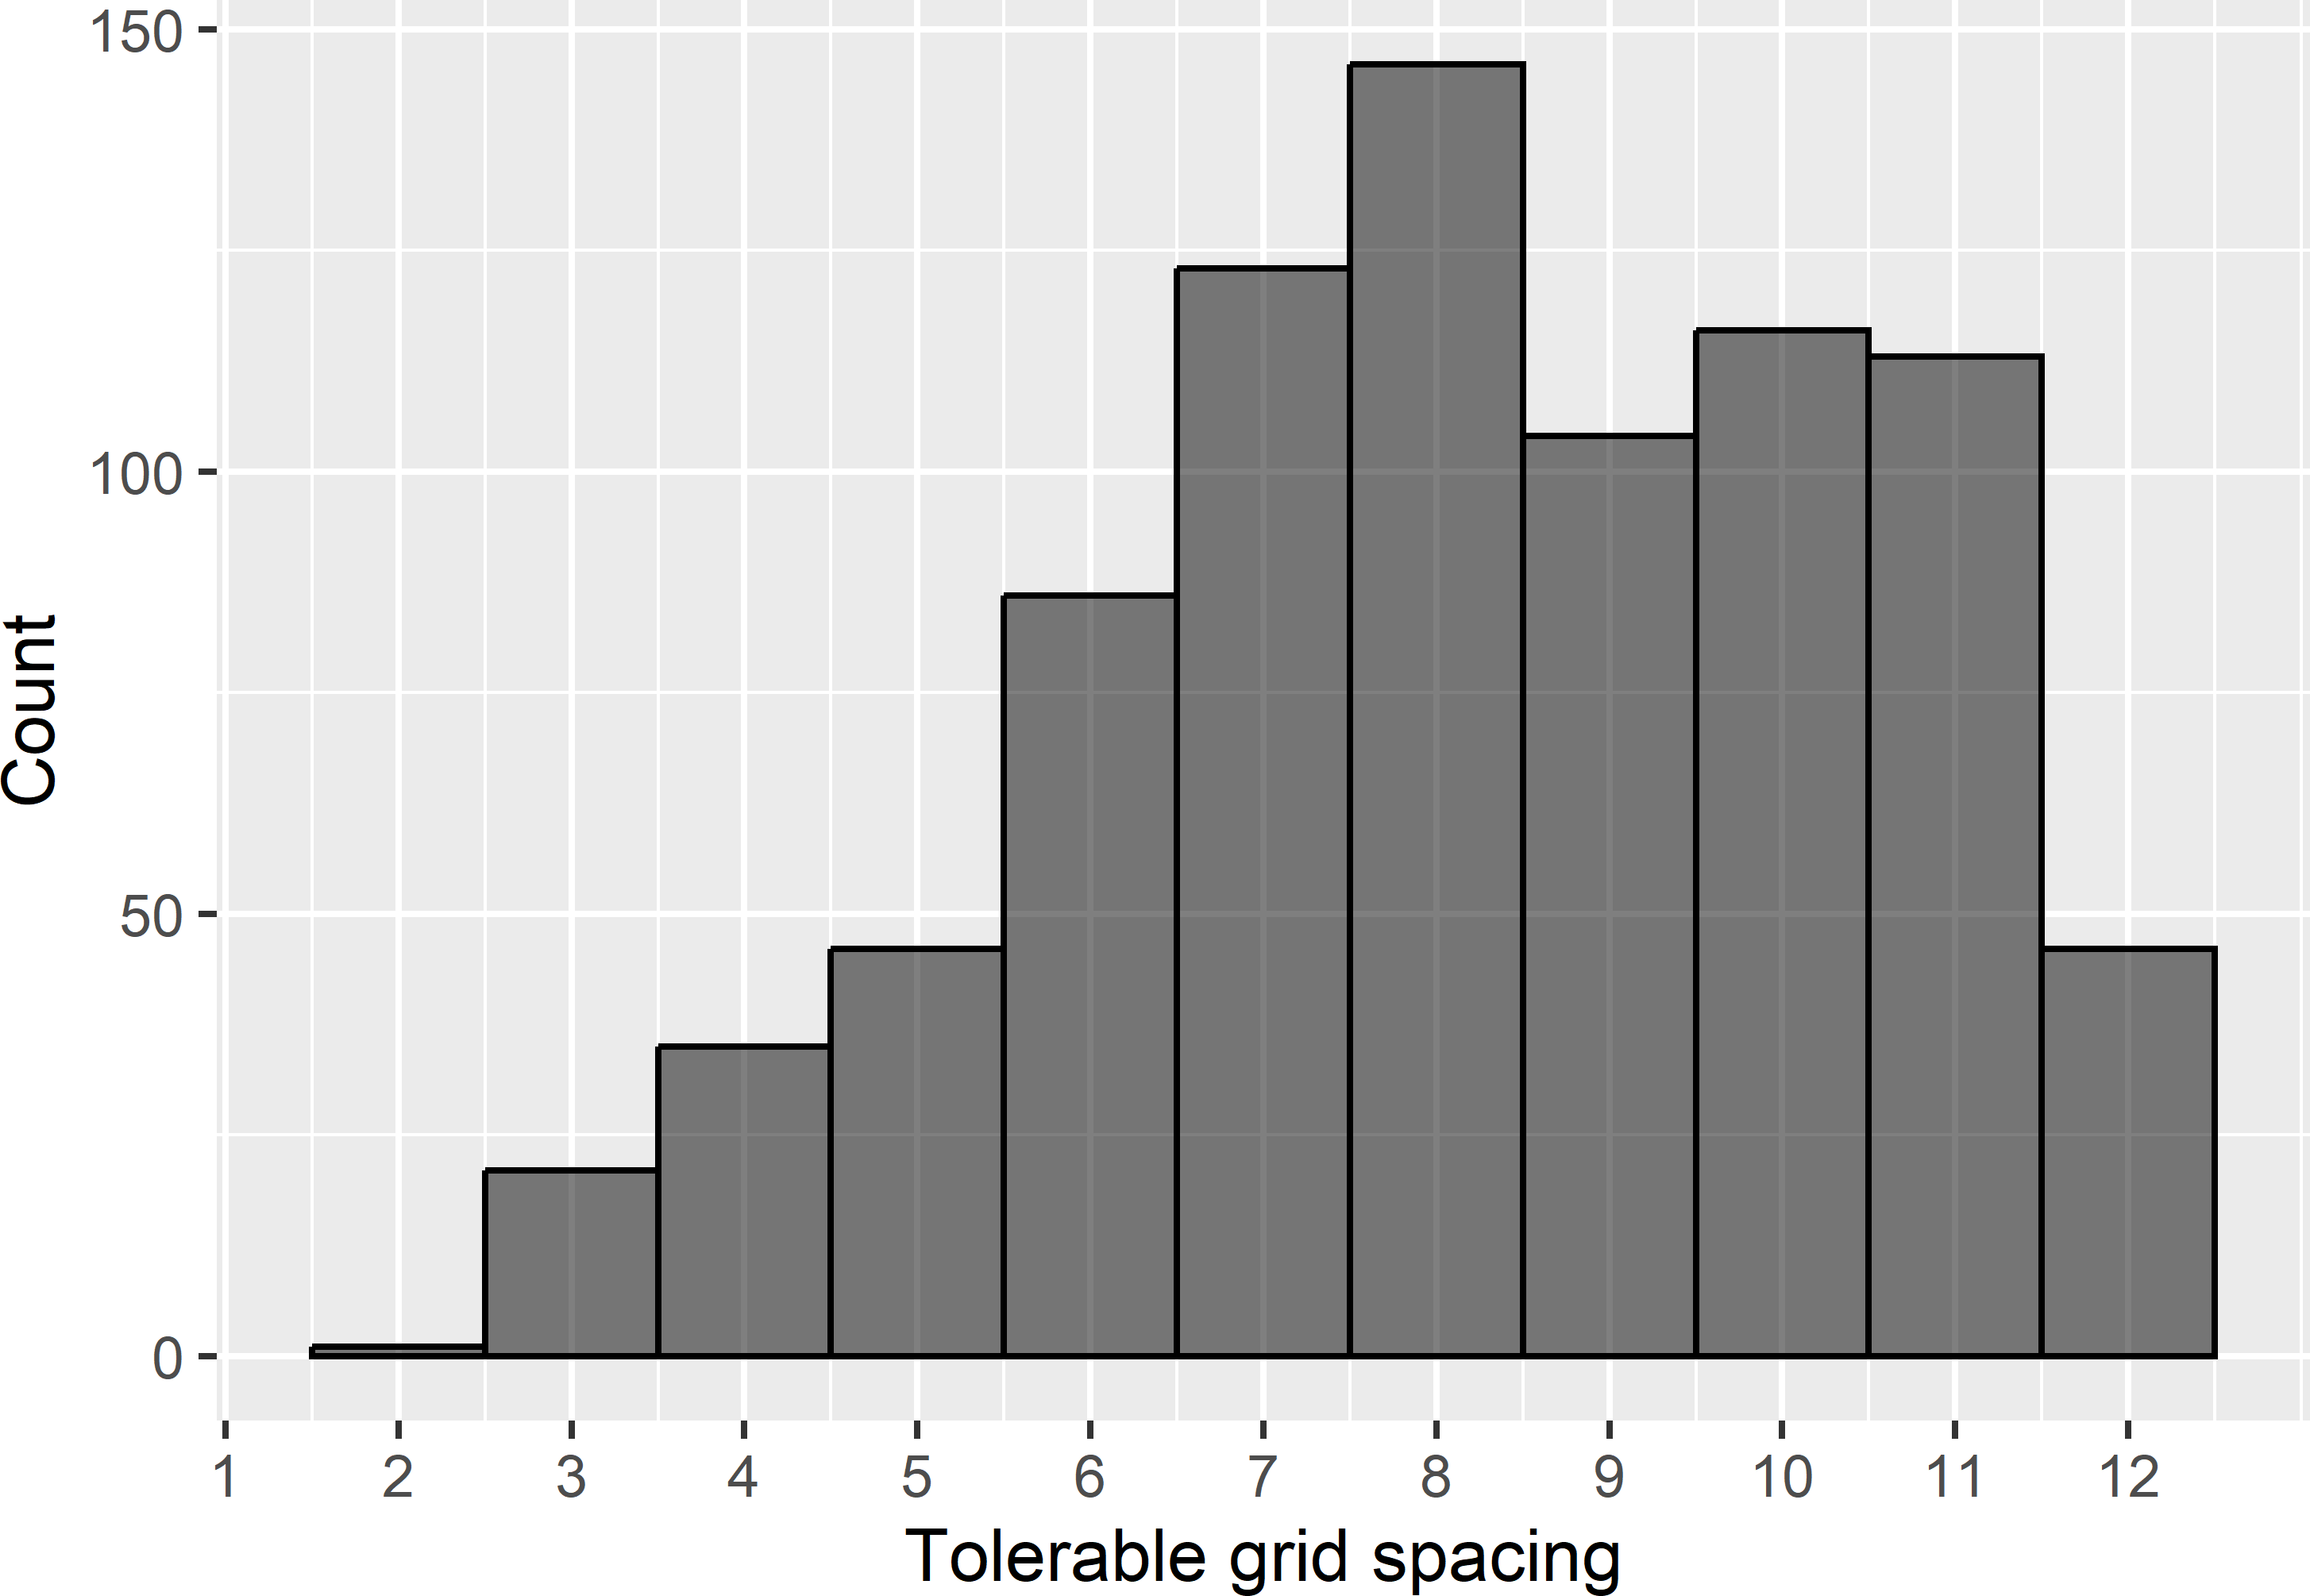 Frequency distribution of tolerable grid spacings for a target MKV of 0.8.